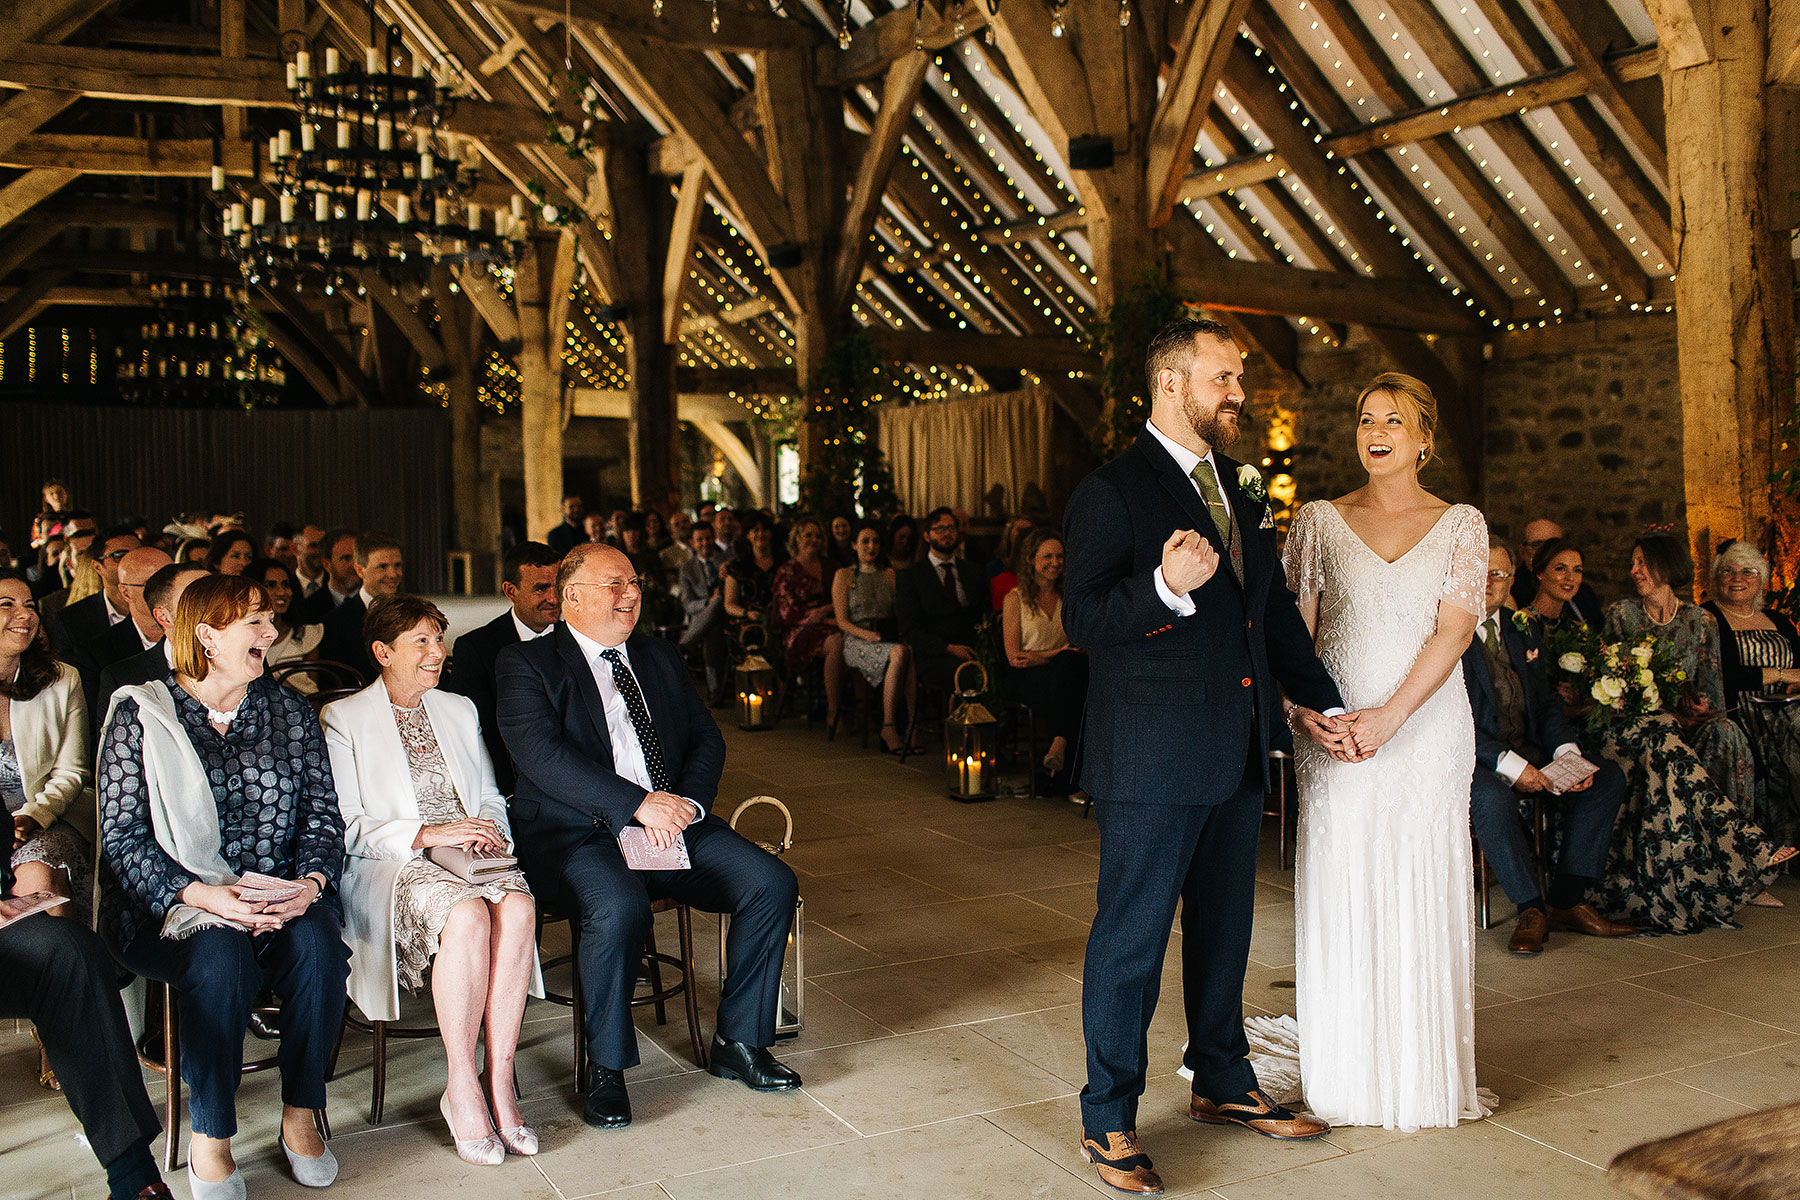 Spring Barn Wedding with a creative bride and groom